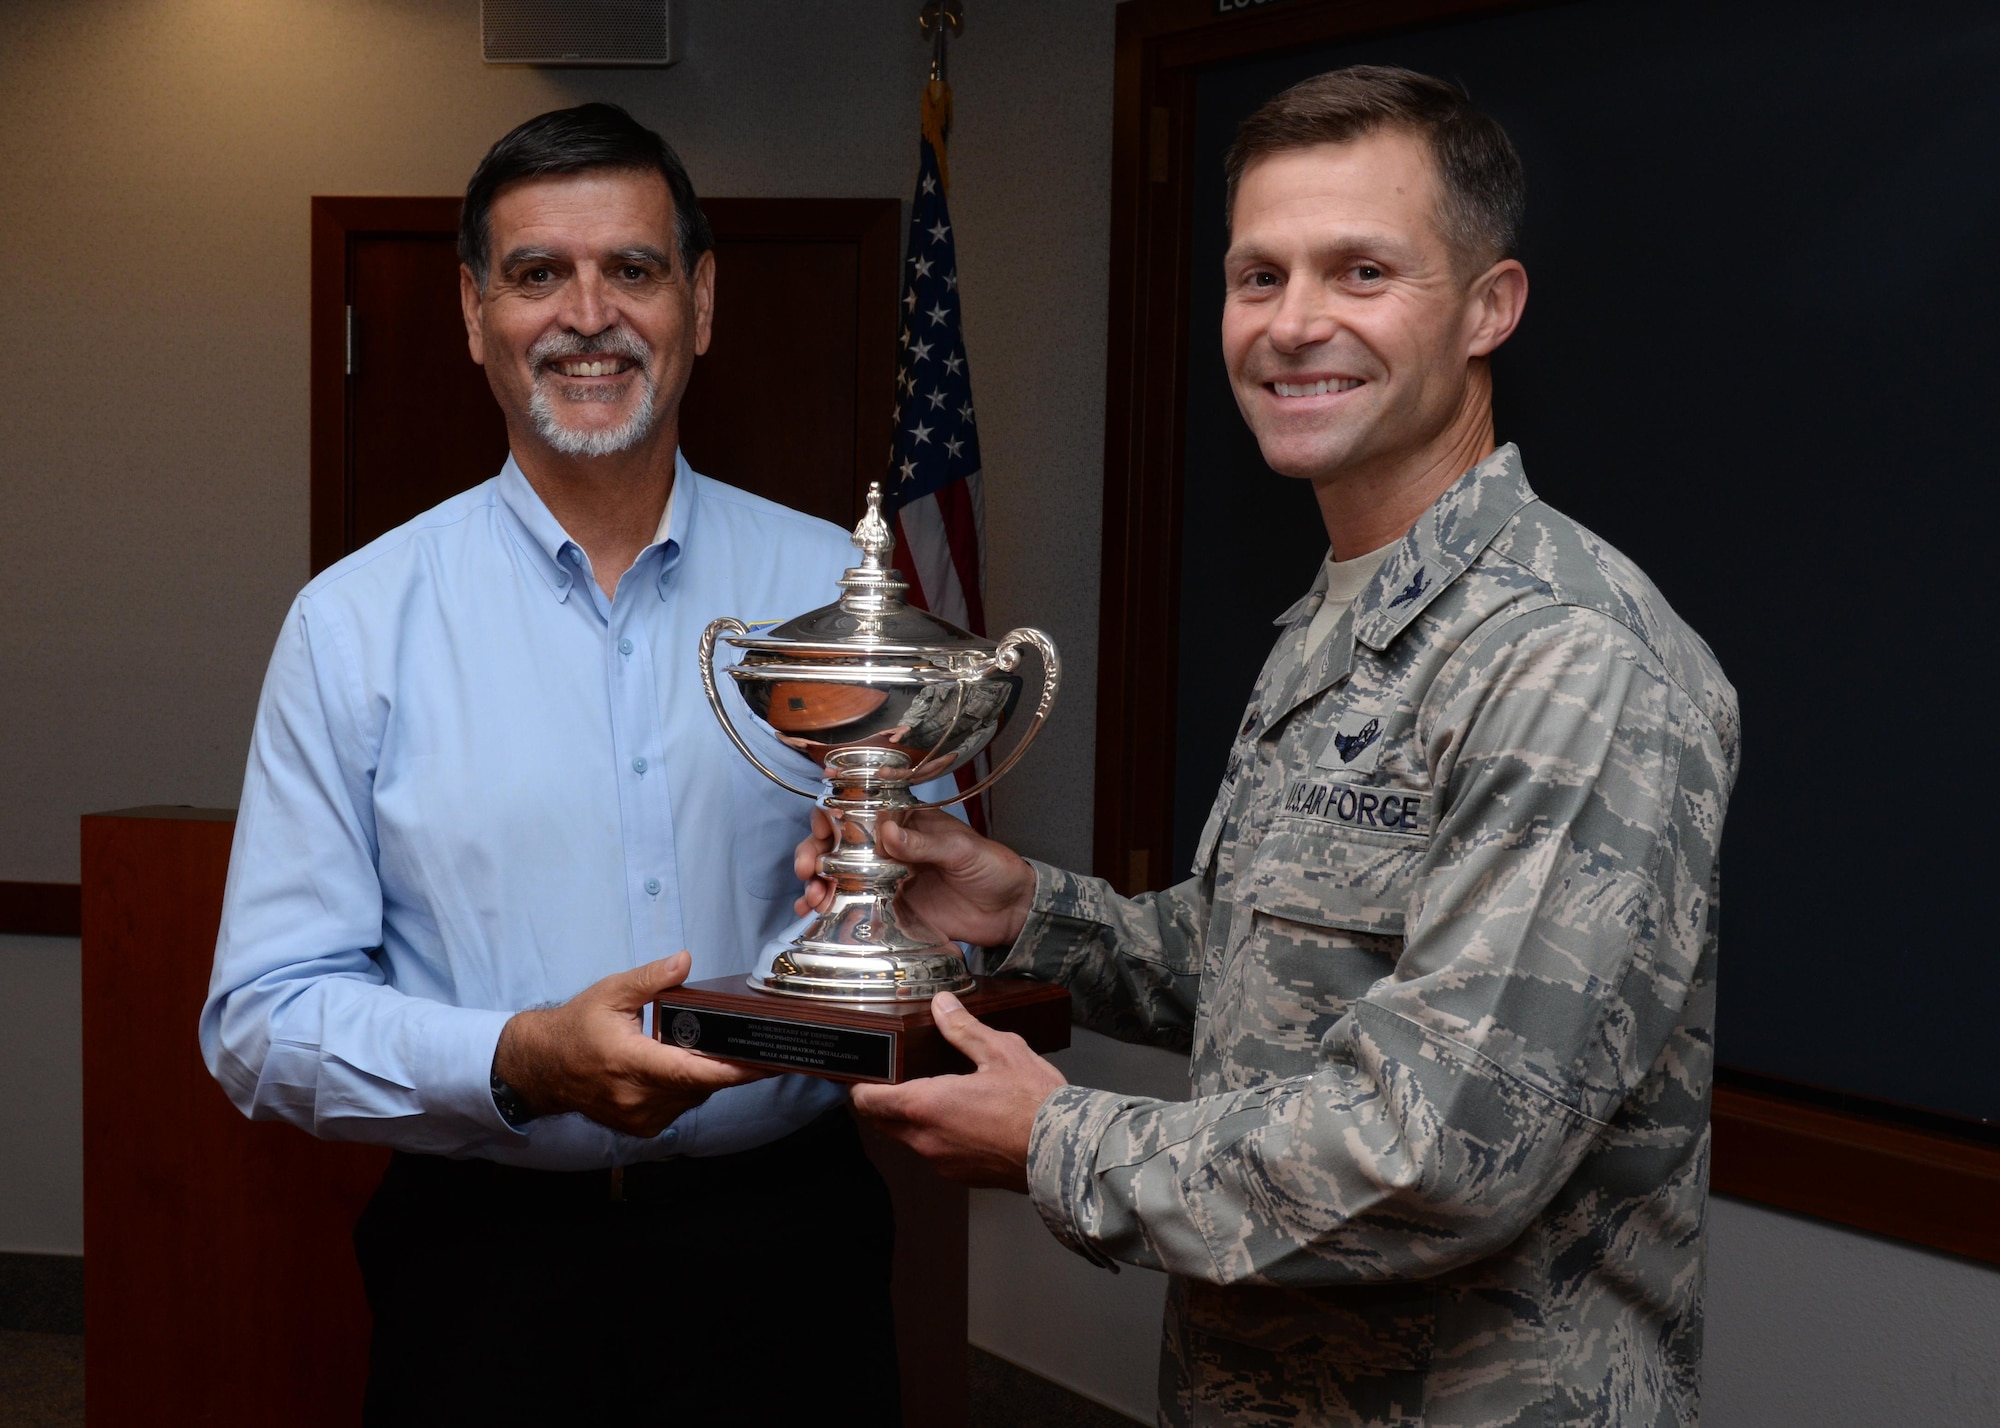 Randy Brown (left), U.S. Air Force Civil Engineer Center director, presents the 2016 Department of Defense Environmental Award for Environmental Restoration, Installation award to Col. Larry Broadwell, 9th Reconnaissance Wing commander, Aug 5, 2016, at Beale Air Force Base, California. Beale received the award for making progress toward cleaning contamination from past defense activities, maintaining partnerships to improve species habitat and minimizing groundwater contamination. (U.S. Air Force photo by Robert Scott)